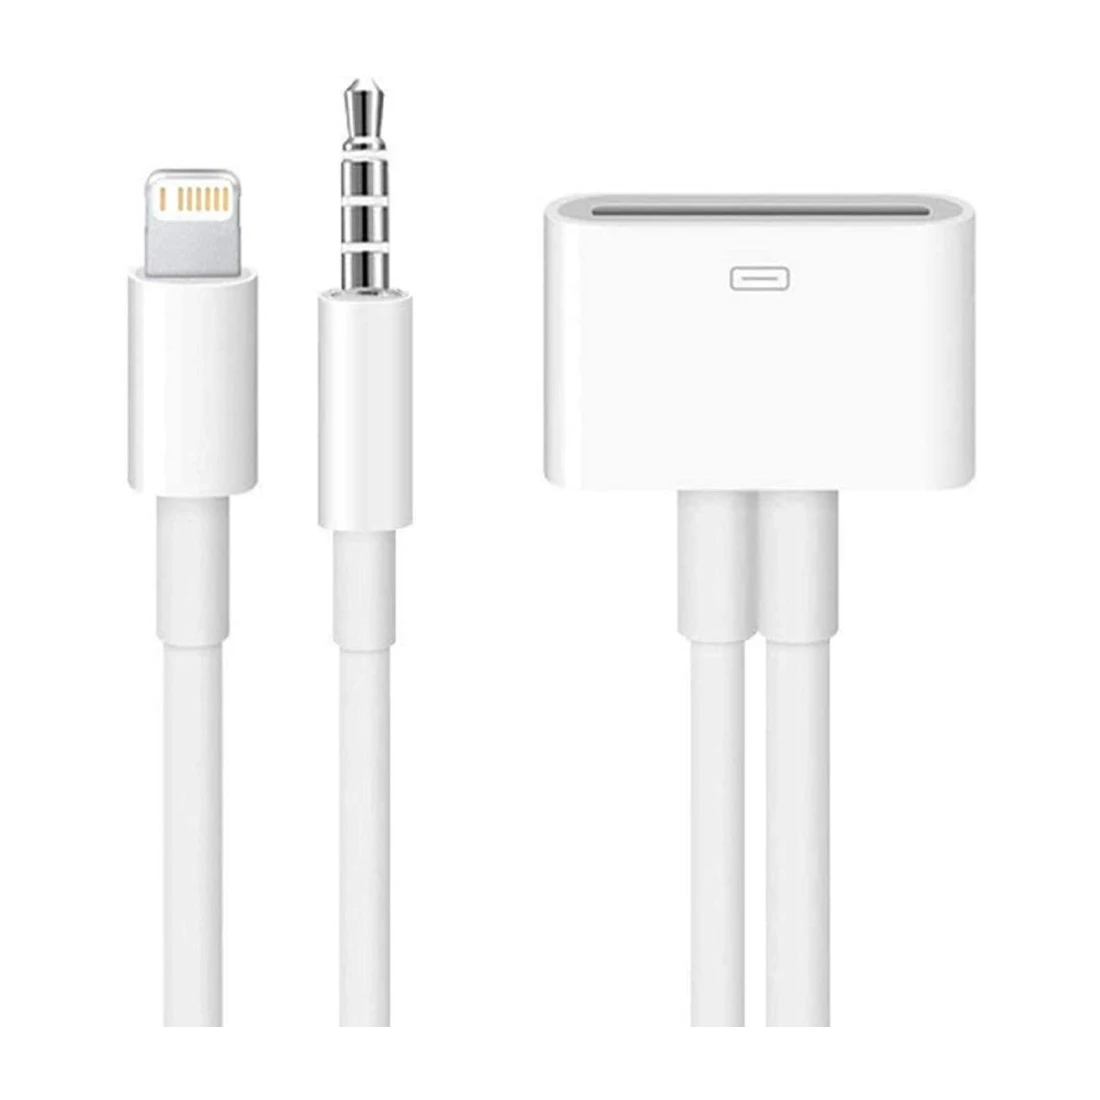 

Lightning to 30 Pin Adapter 3.5mm AUX Audio Port Support Charging Data Transmission for iPhone 6 6 Plus 5s 5c 5 4s 4 iPad iPod